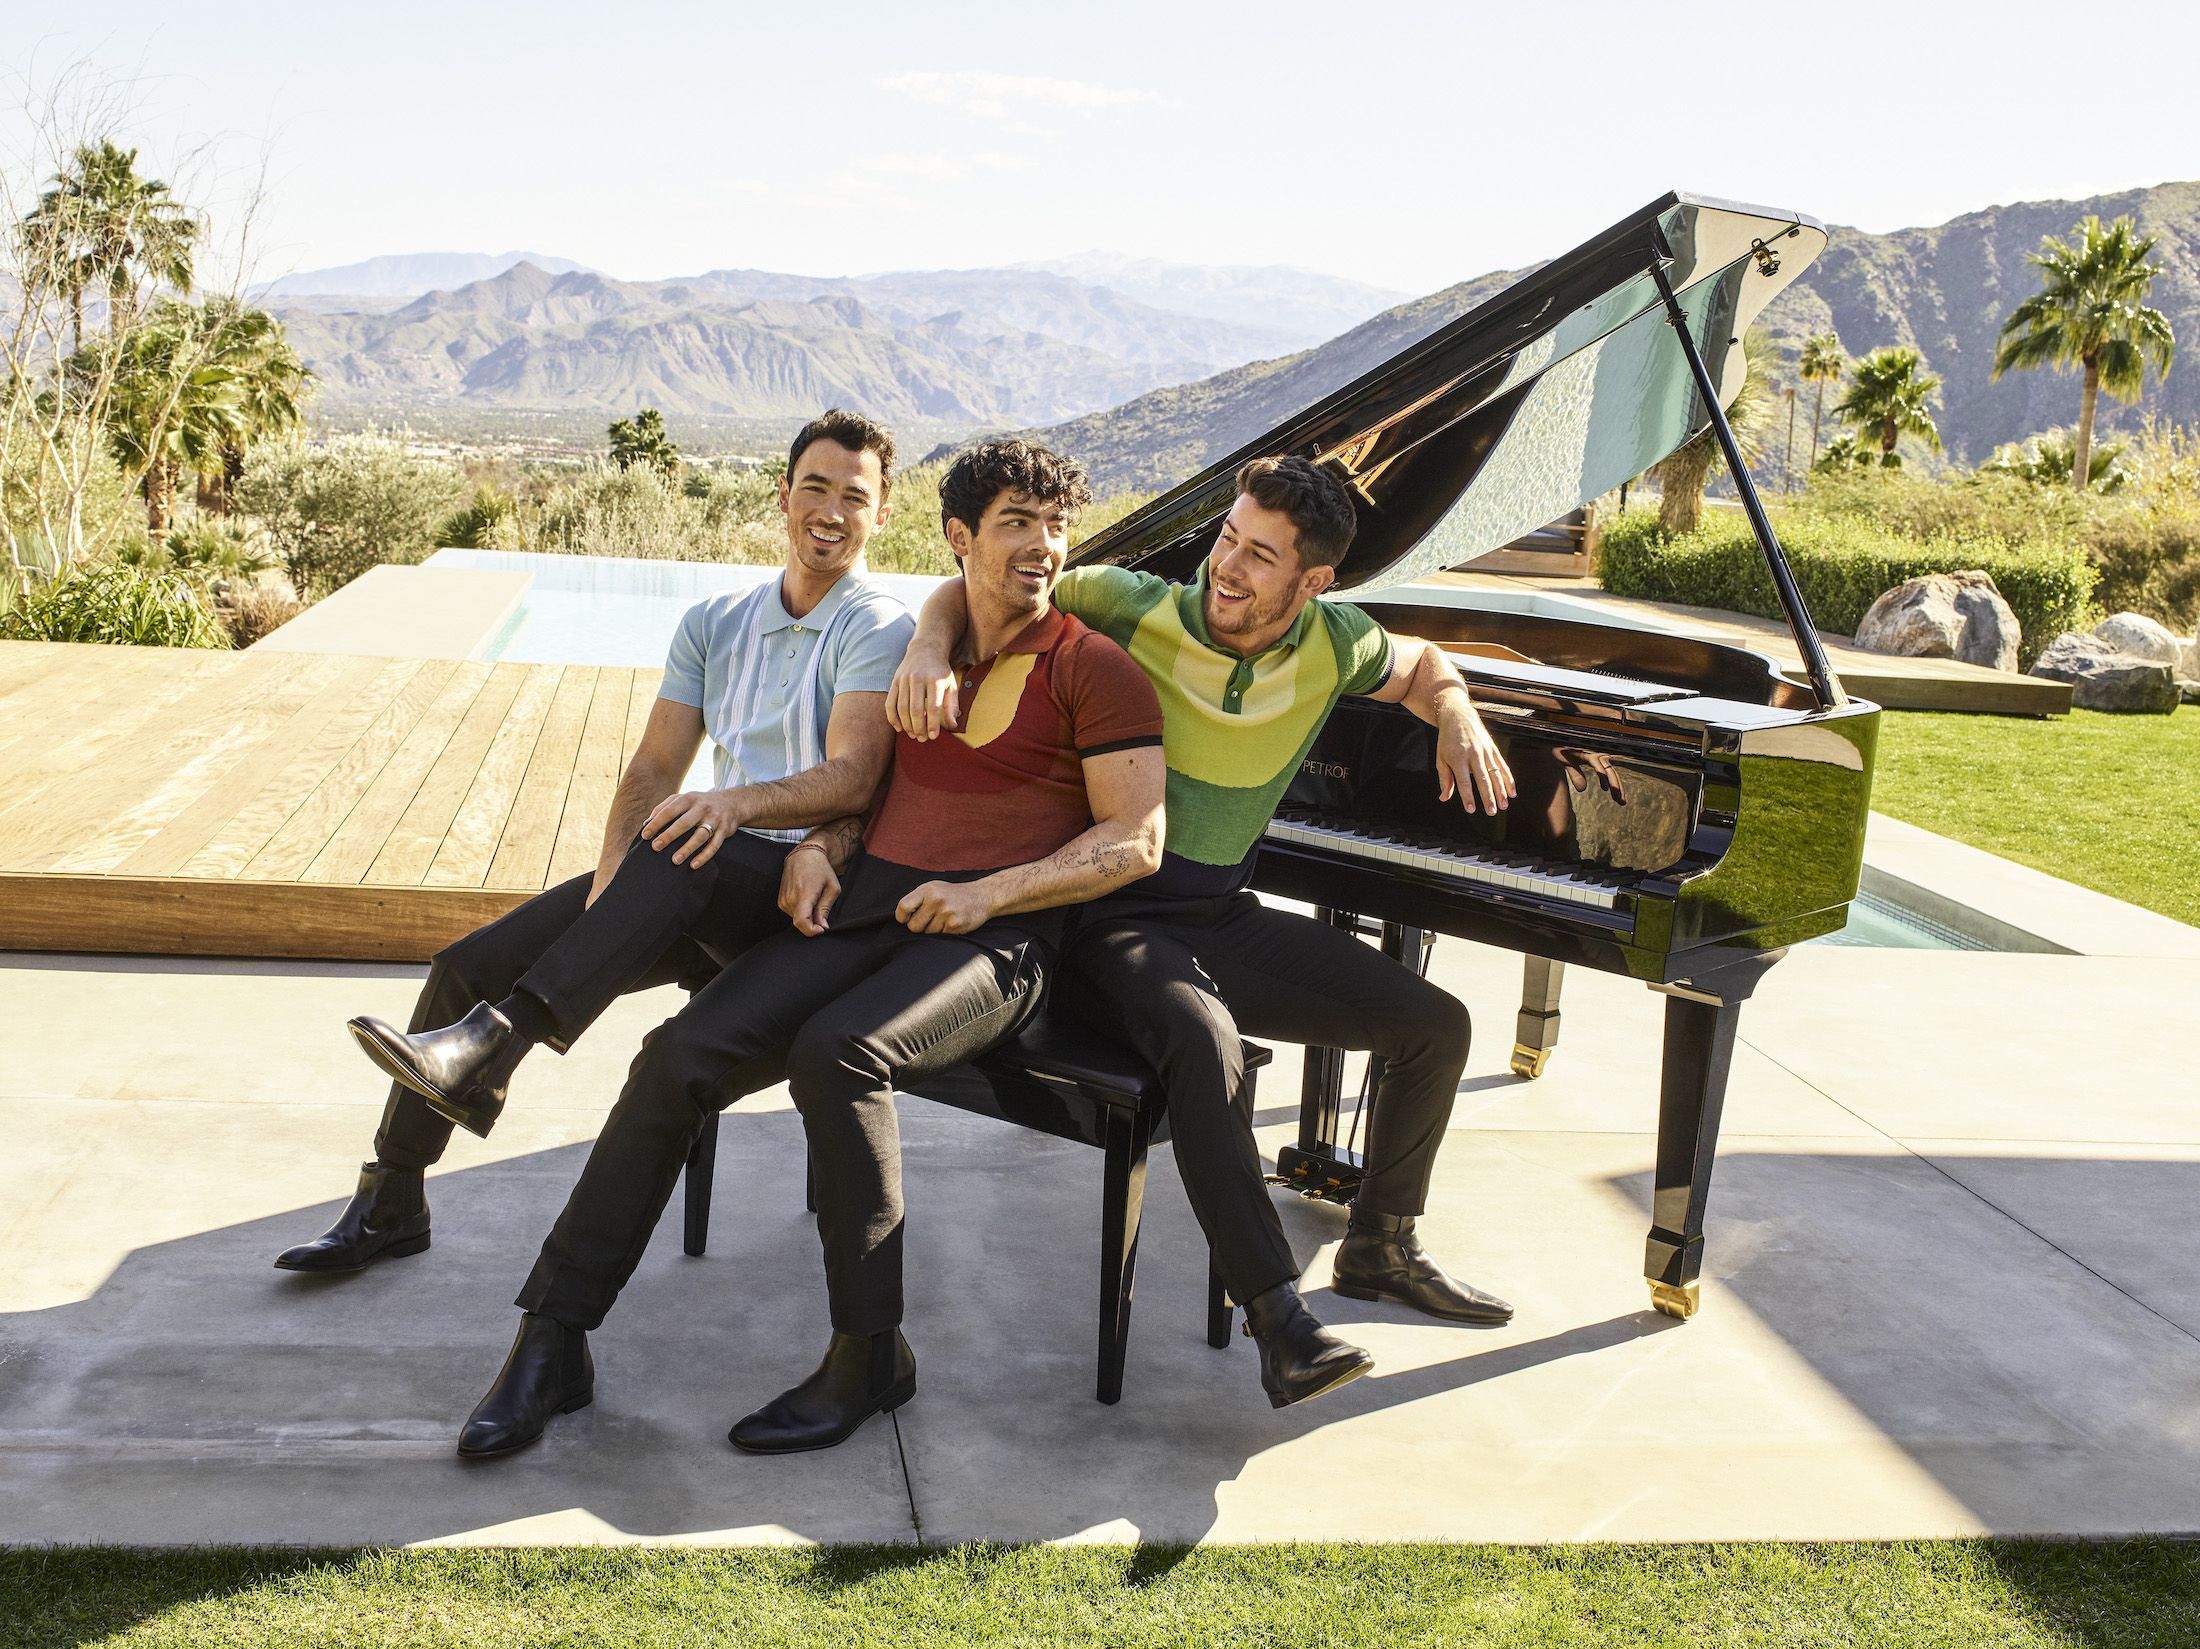 The Jonas Brothers on Their Reunion and Album 'Happiness Begins